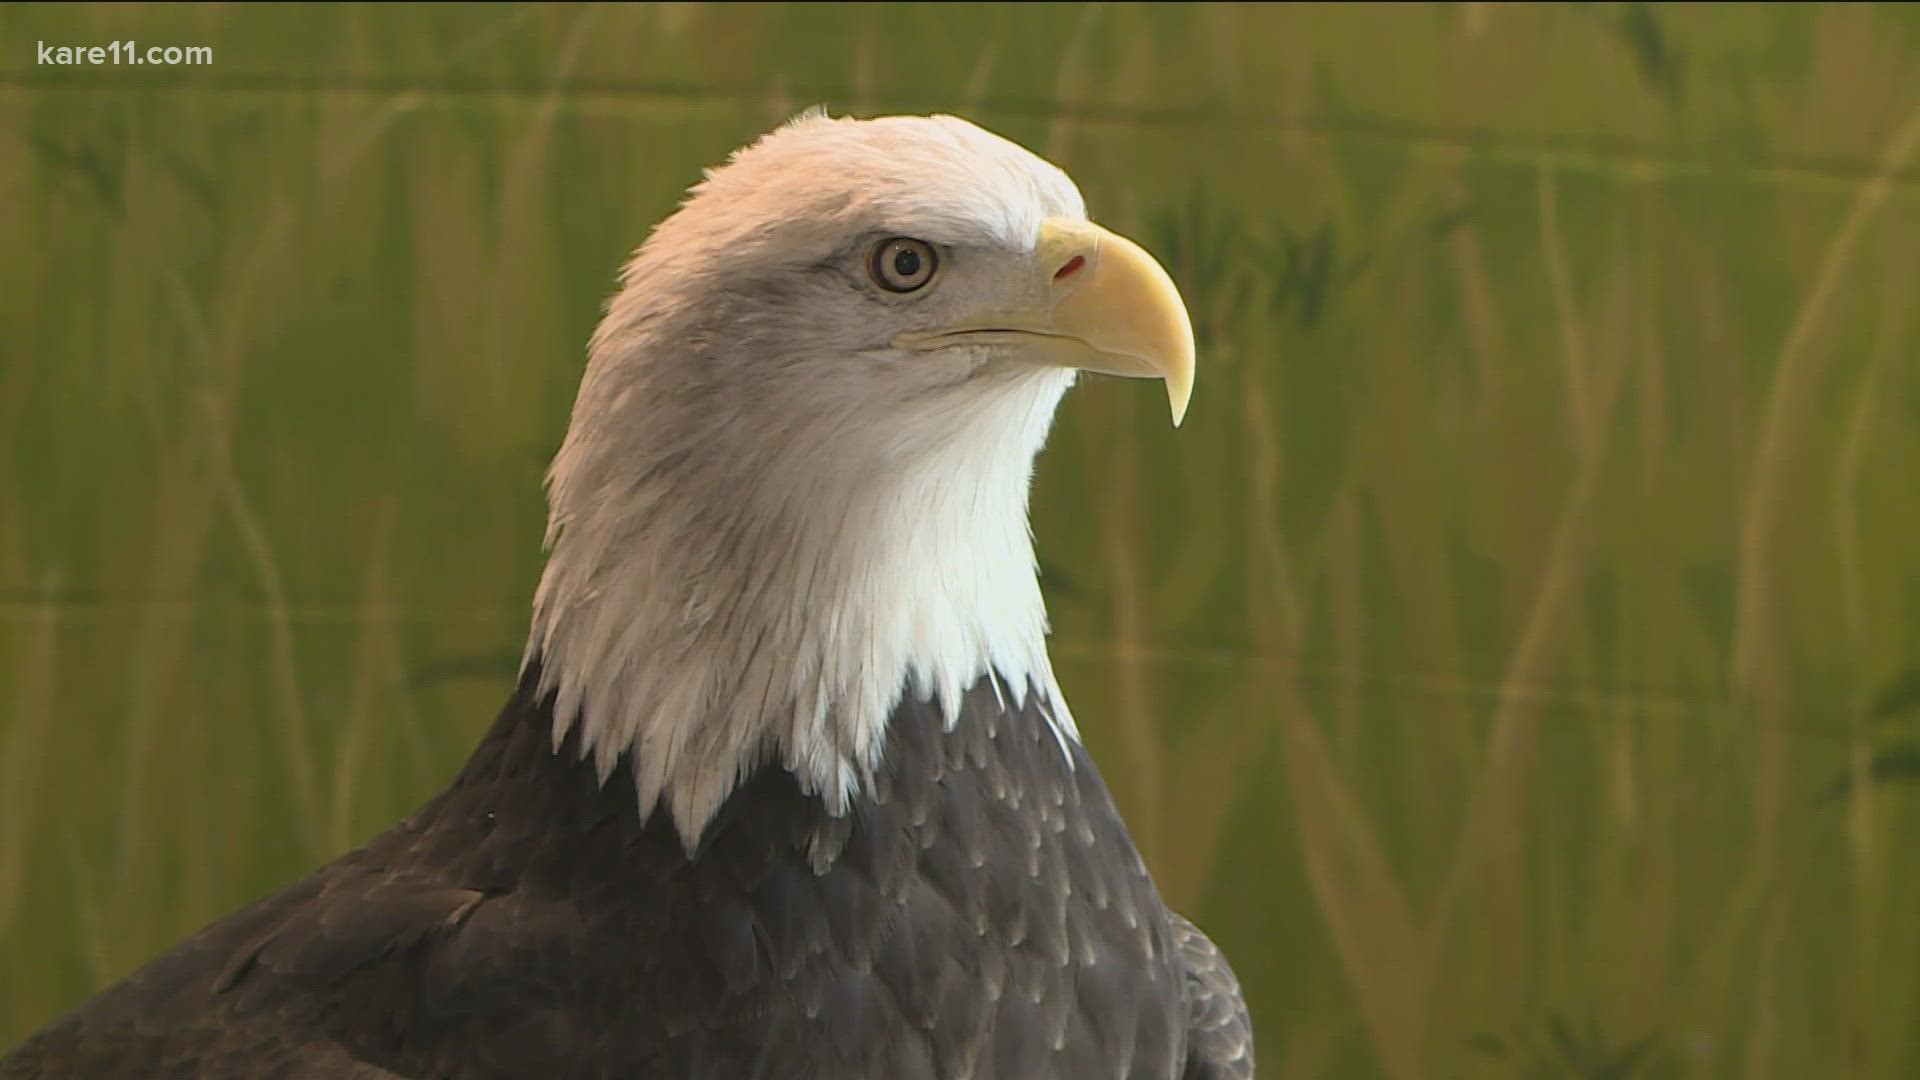 Later this month, the National Eagle Center in Wabasha will close its doors for the winter to work on a multi-million dollar renovation and expansion.